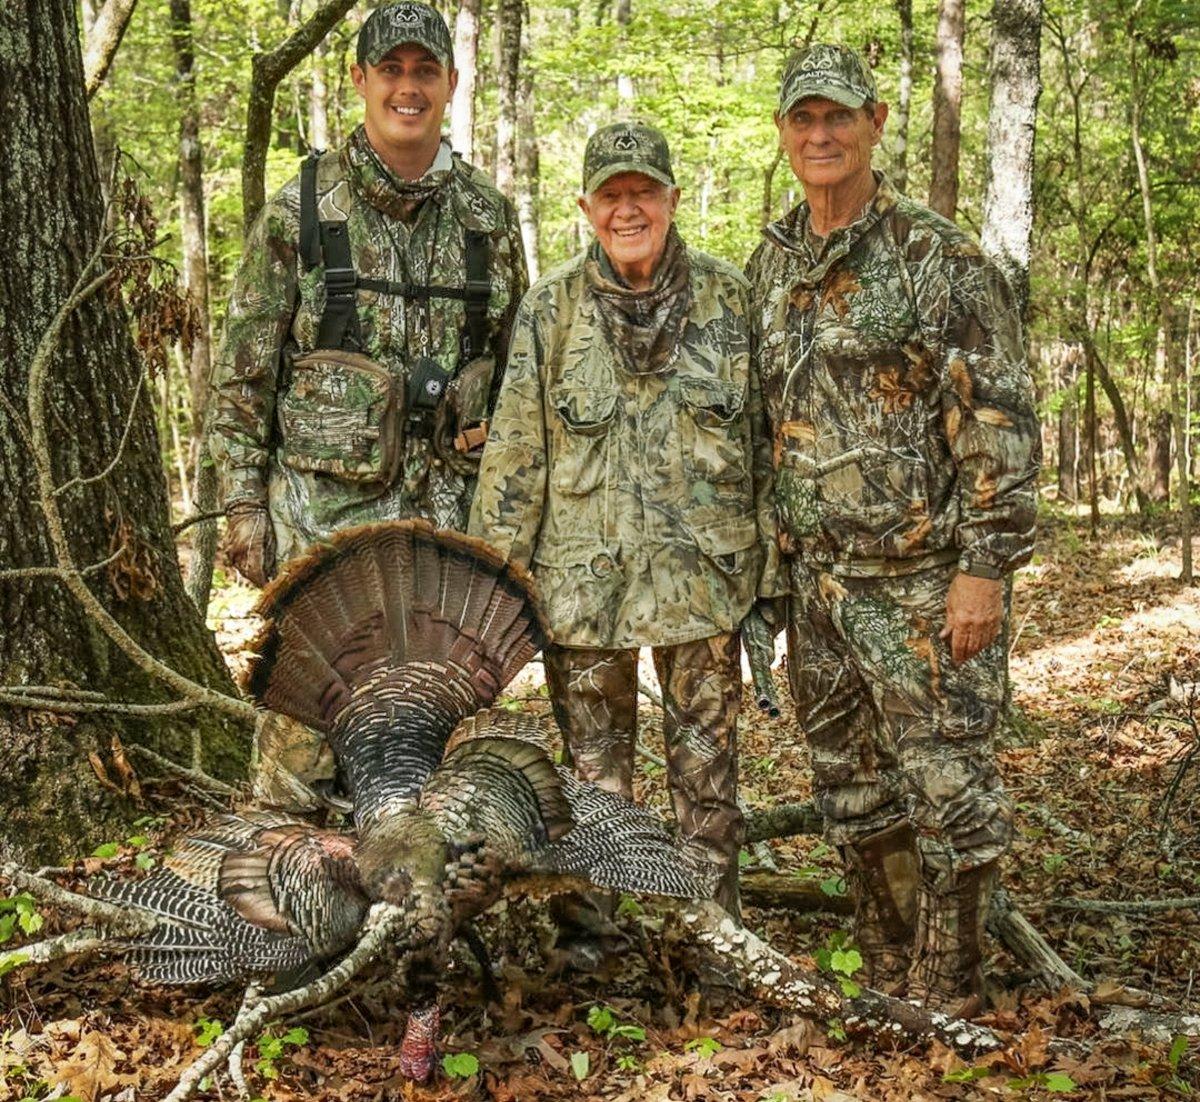 Former President Jimmy Carter shot his biggest turkey ever in 2017 with Bill and Tyler Jordan at Realtree Farms.